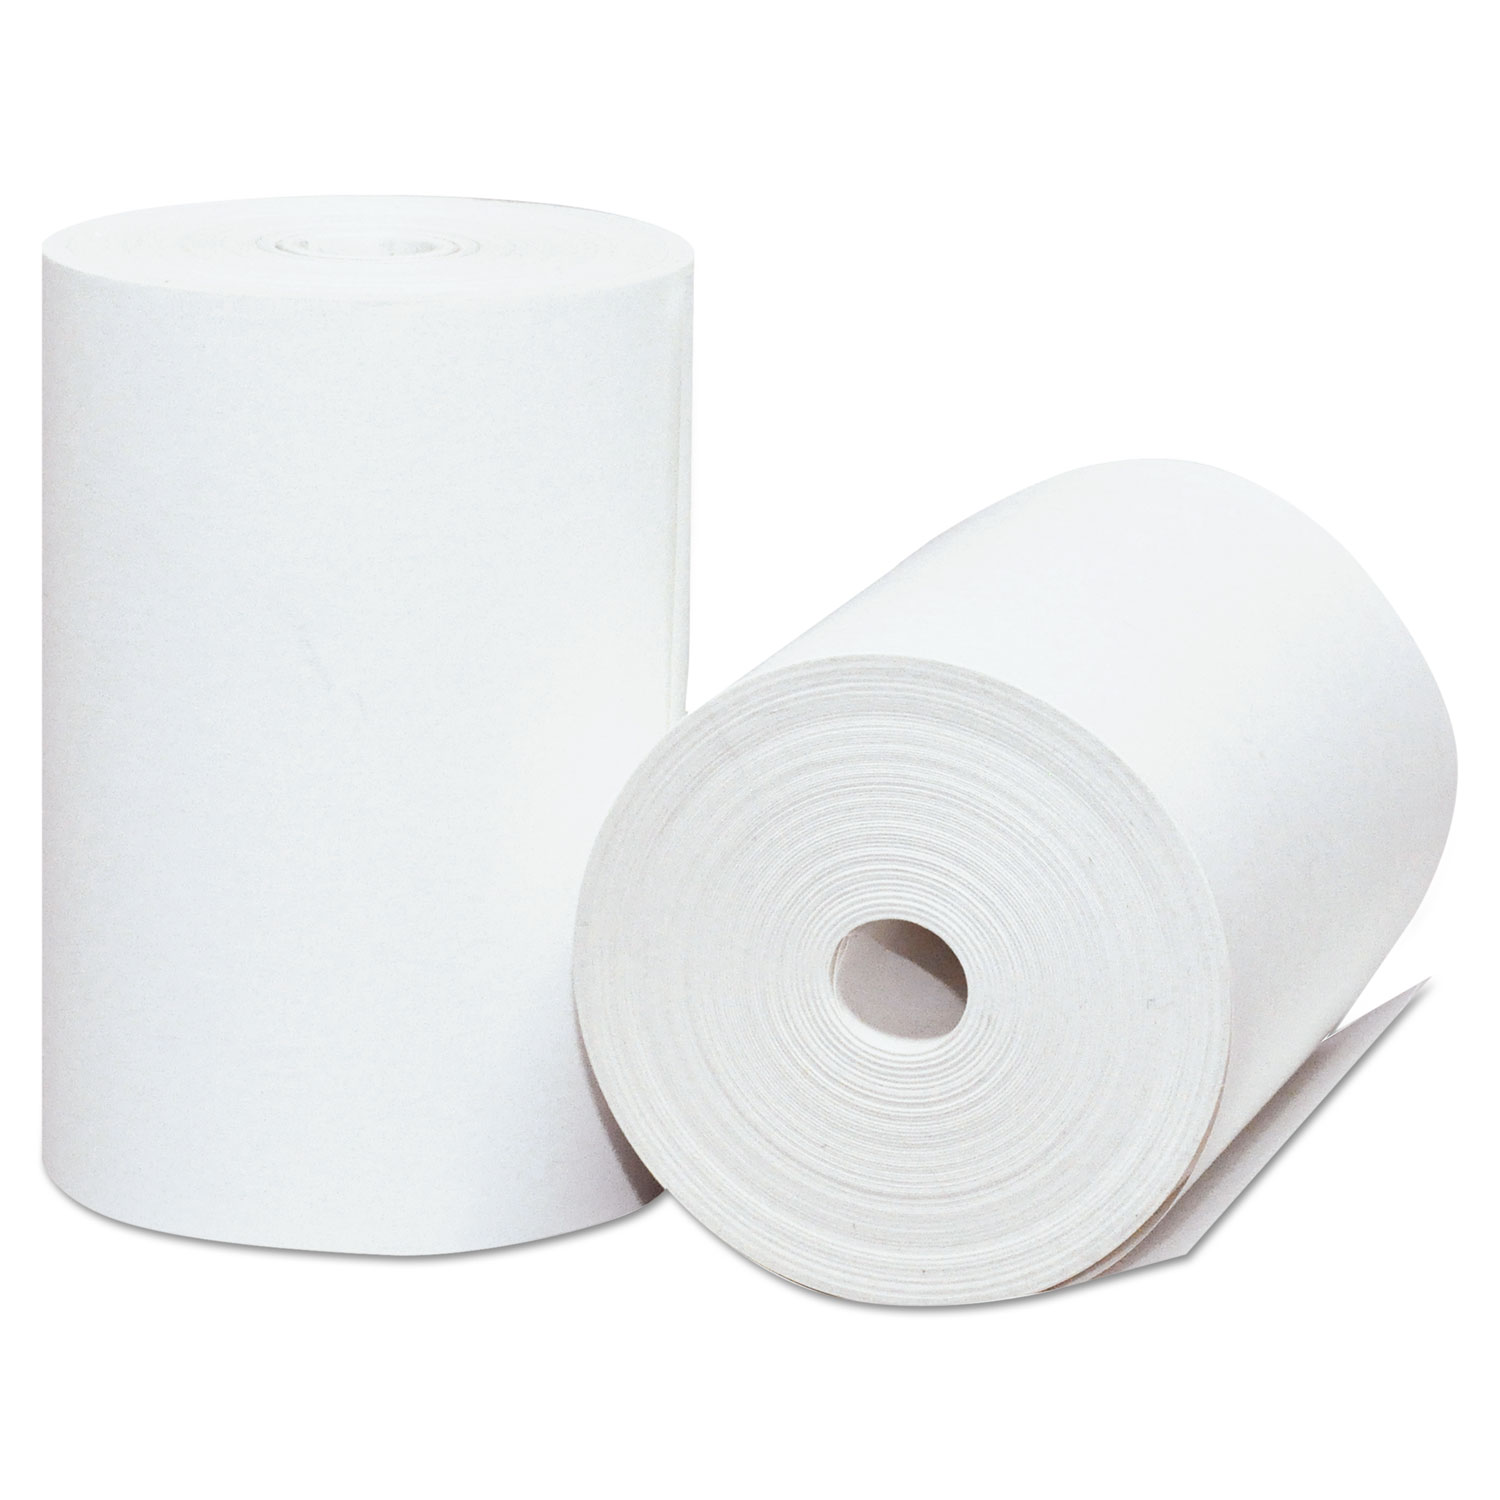 ICONEX Thermal Receipt Paper White 2 14 x 55 ft 5 Pack BPA Free